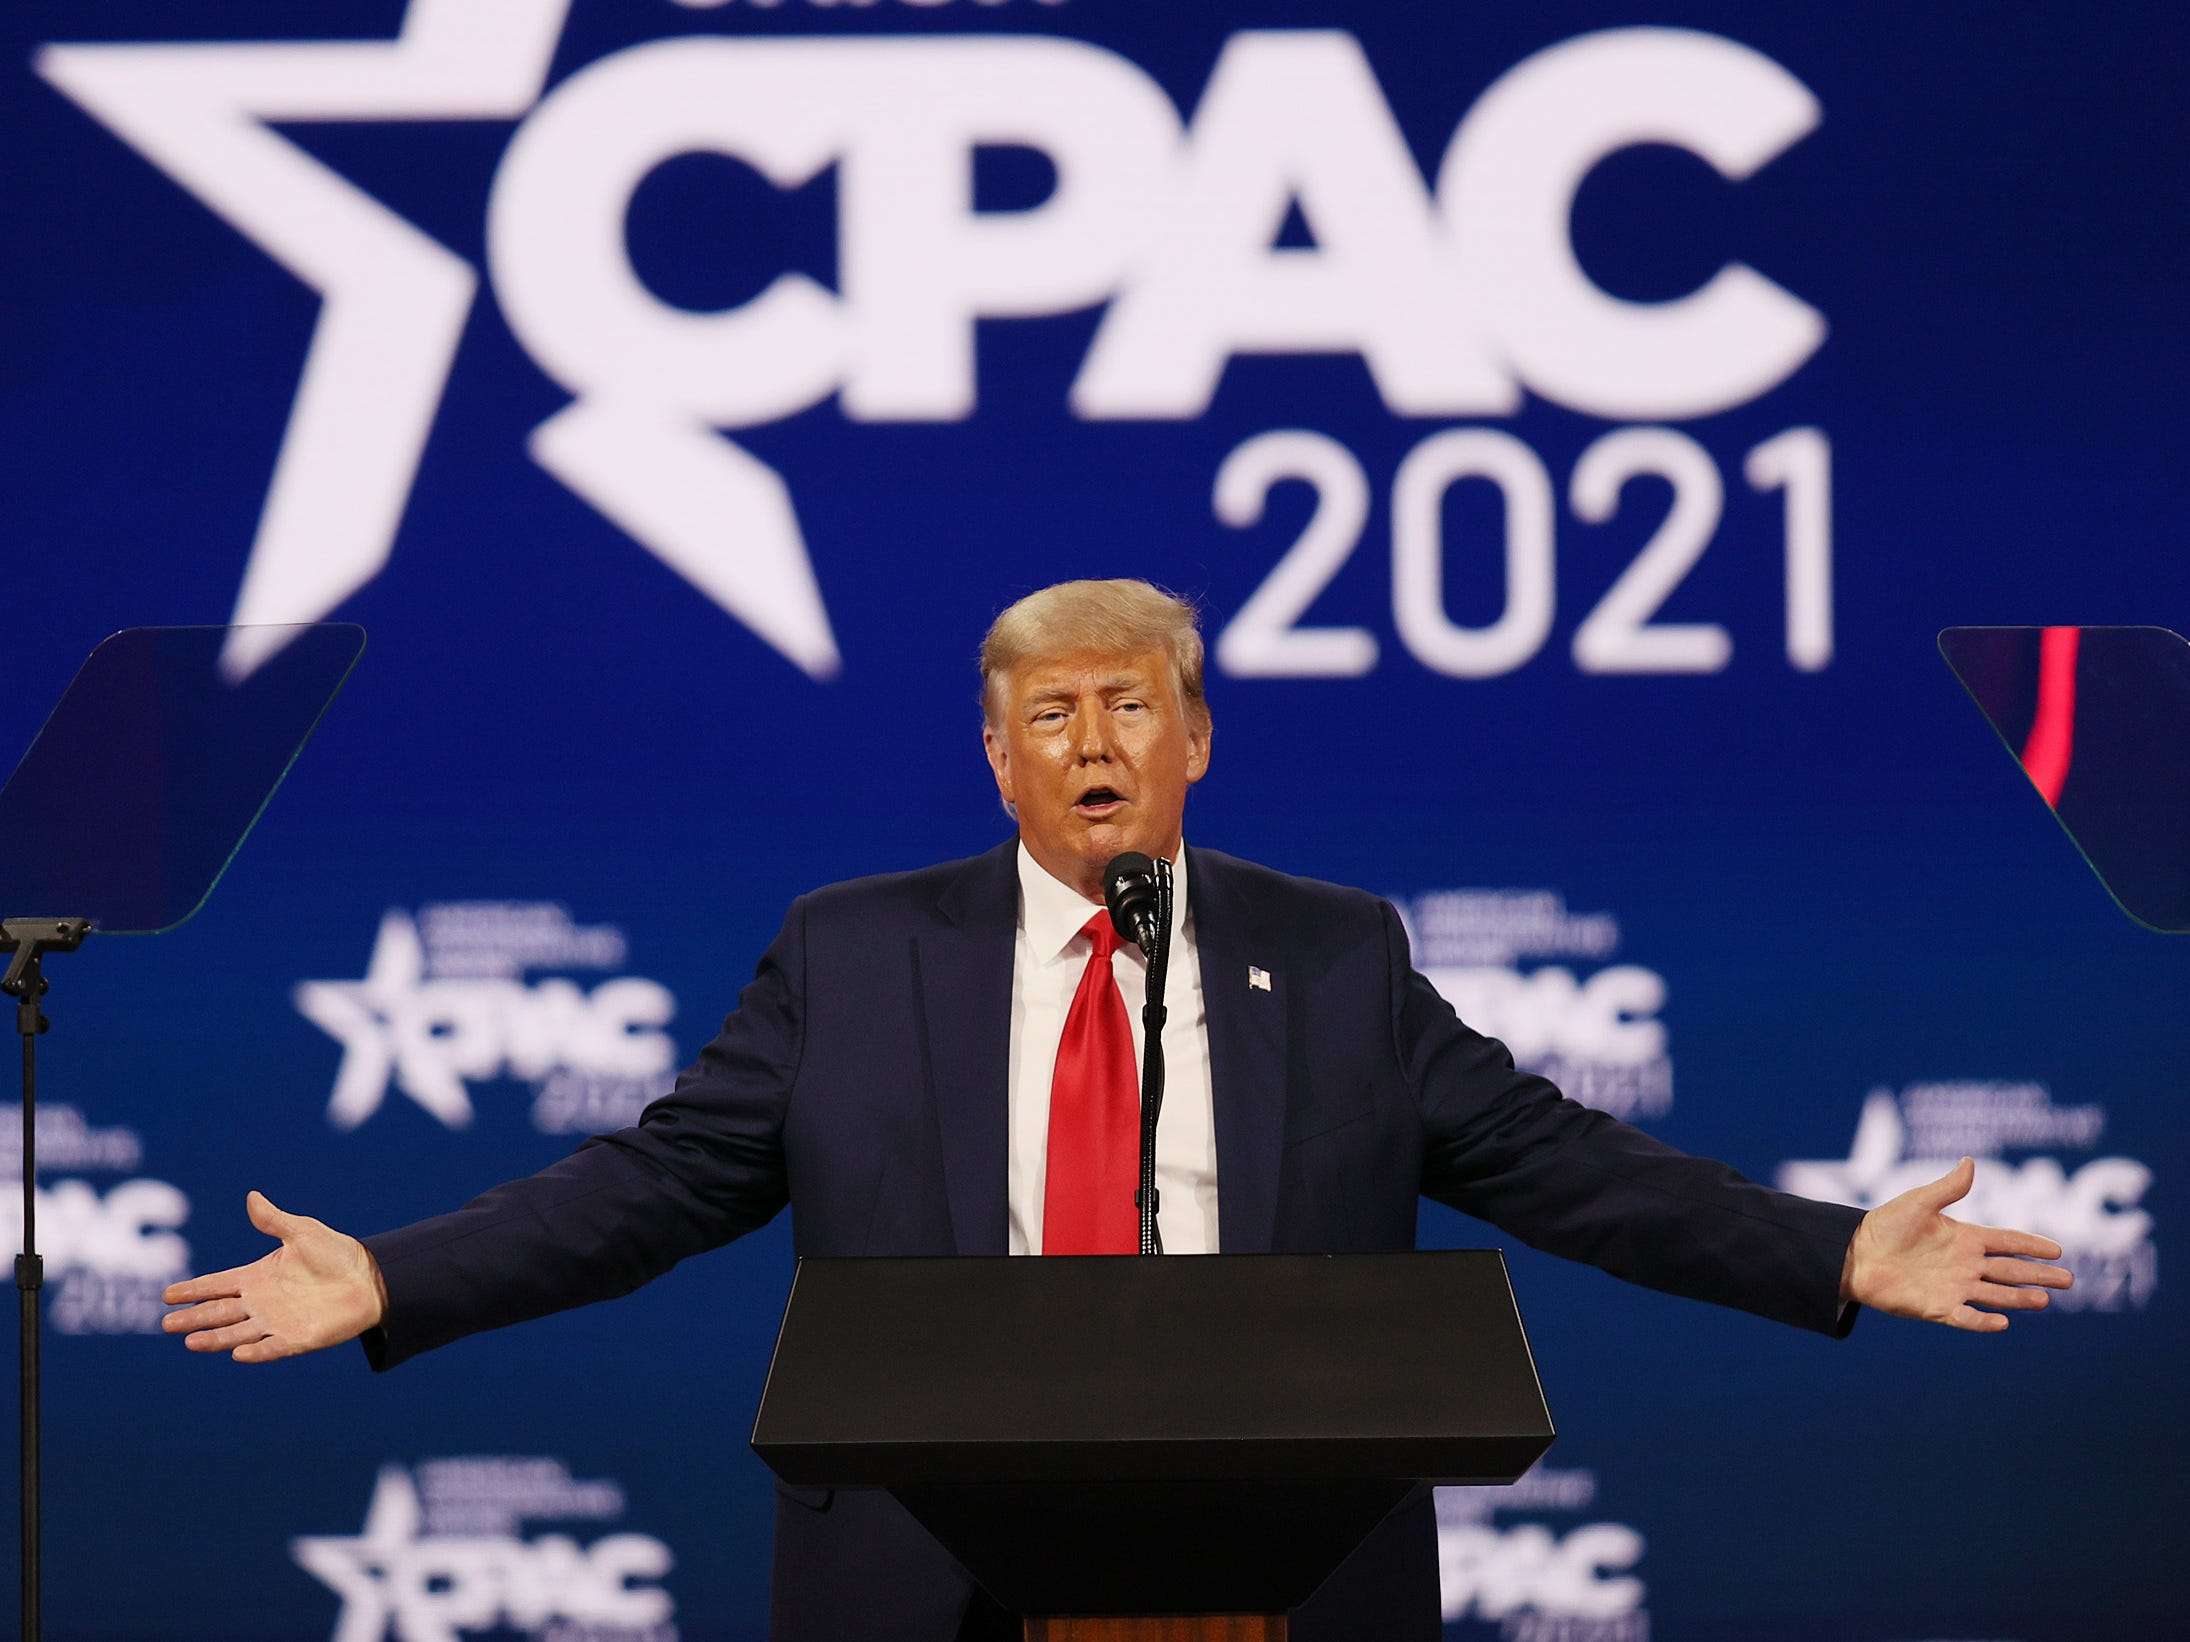 Here are the false and misleading claims Trump made in his CPAC speech